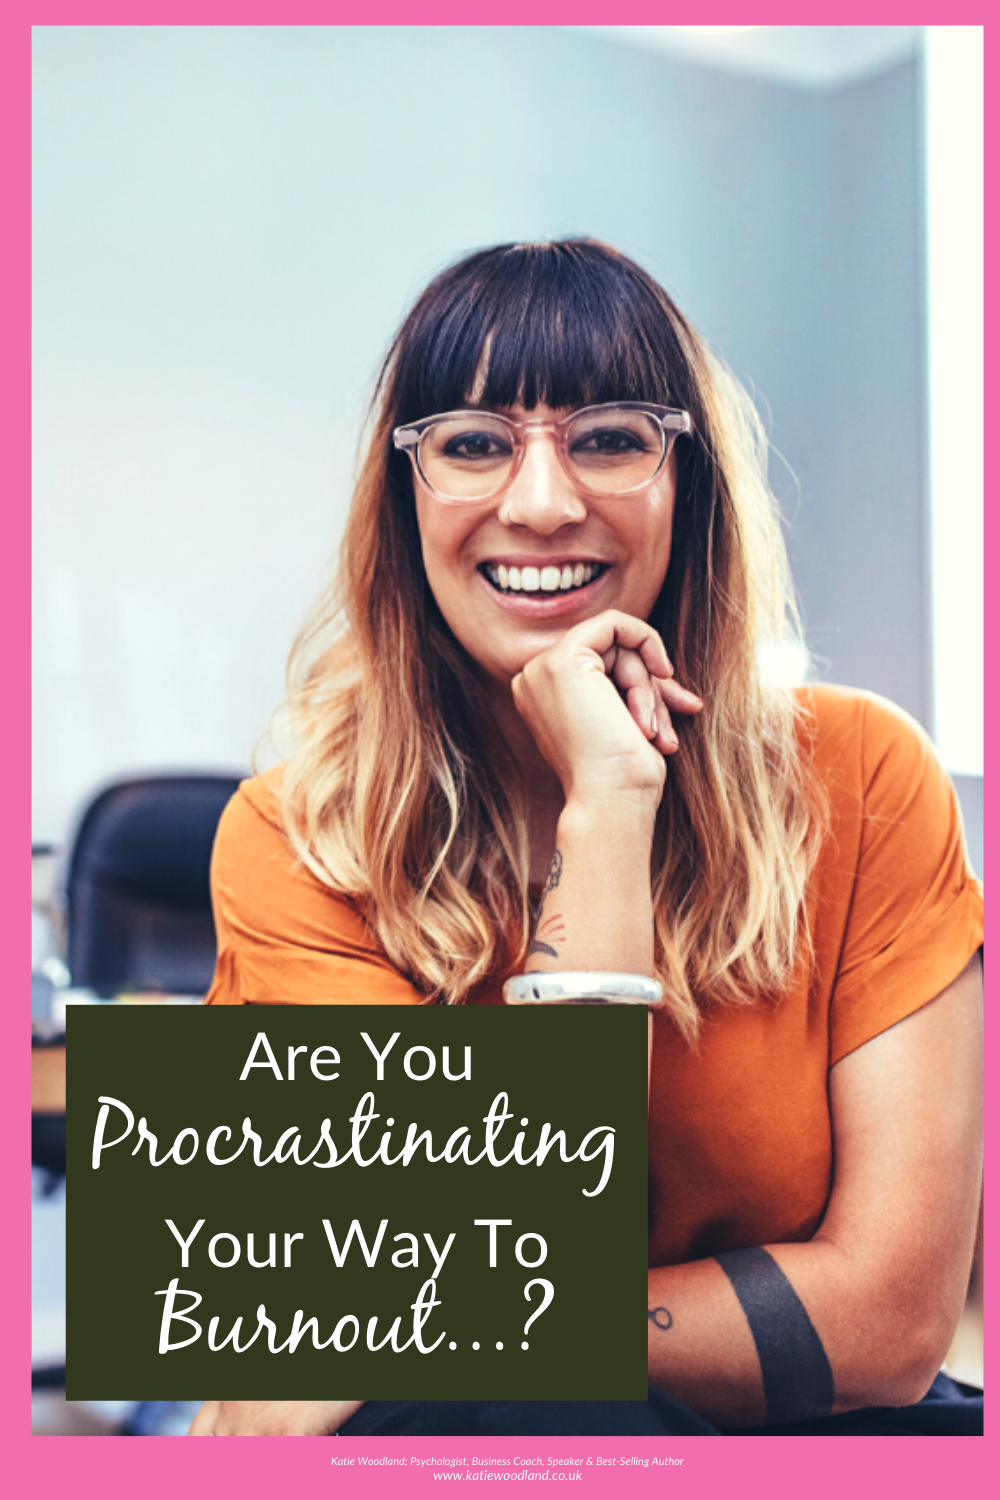 Are You Procrastinating Your Way To Burnout?